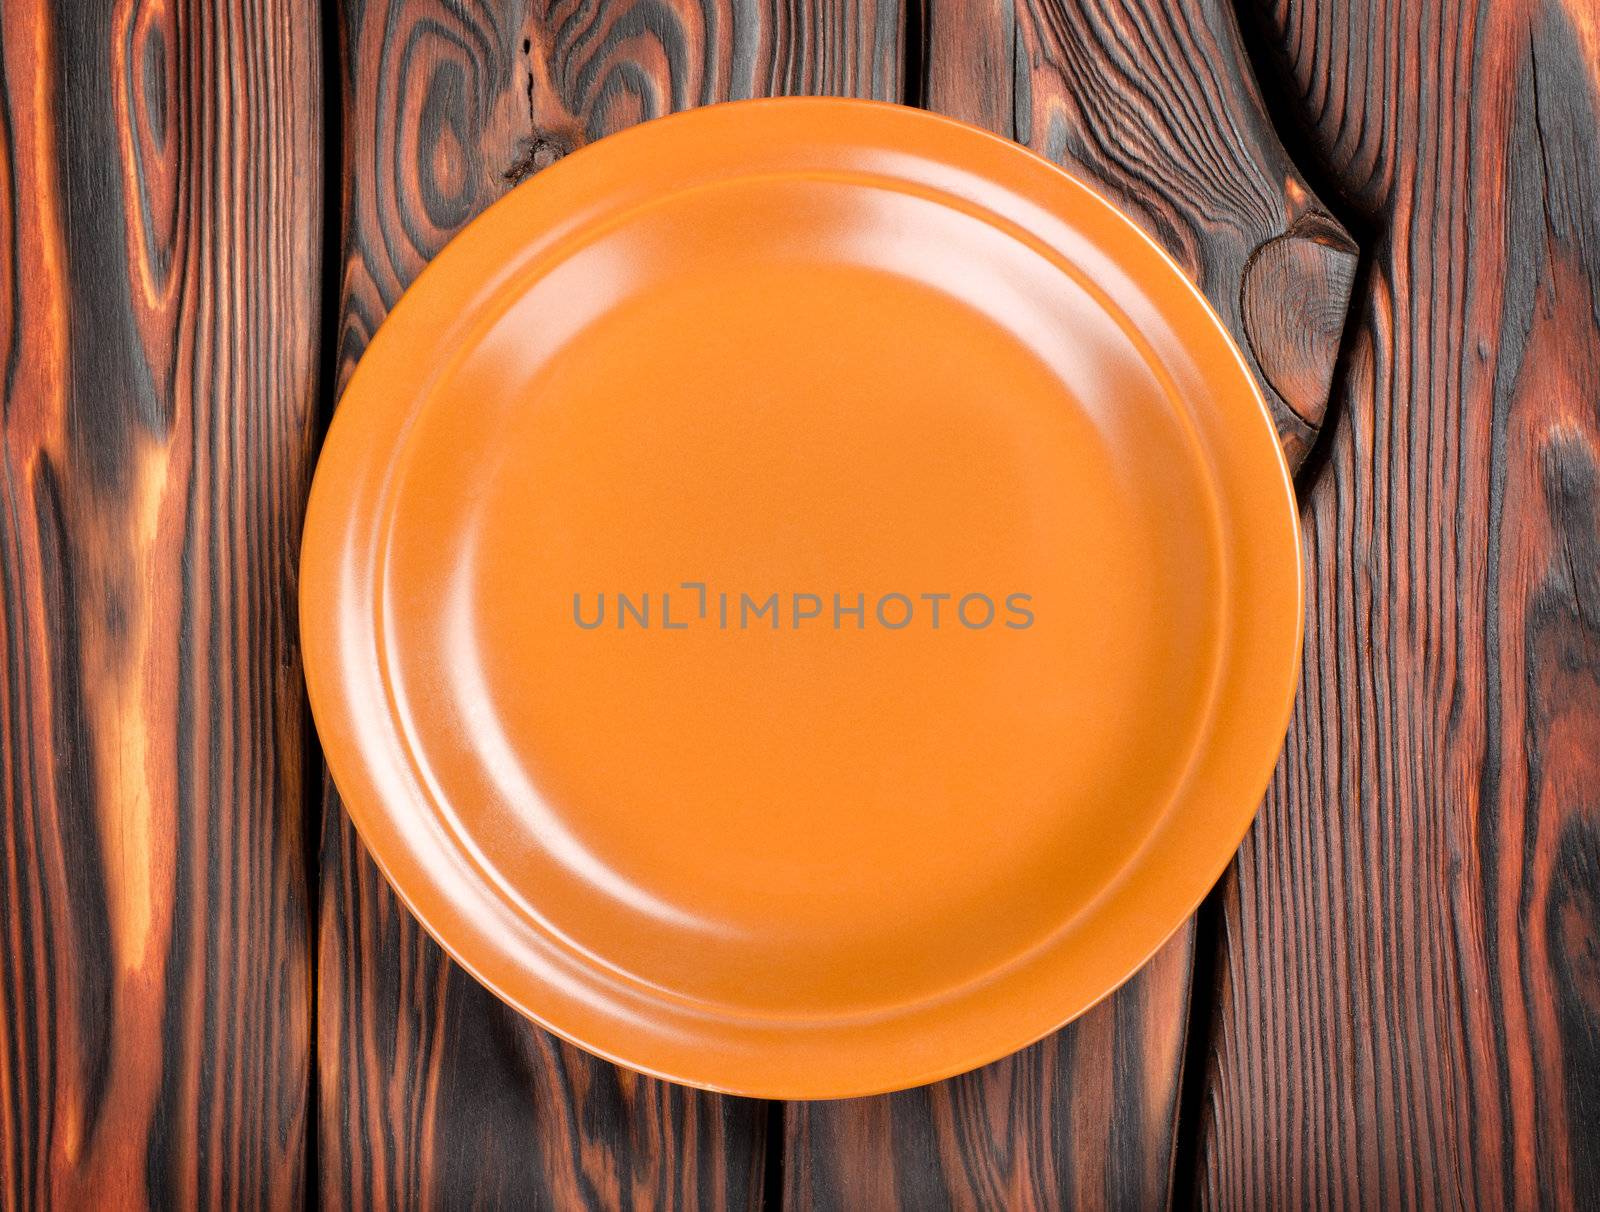 Empty brown plate on a wooden table